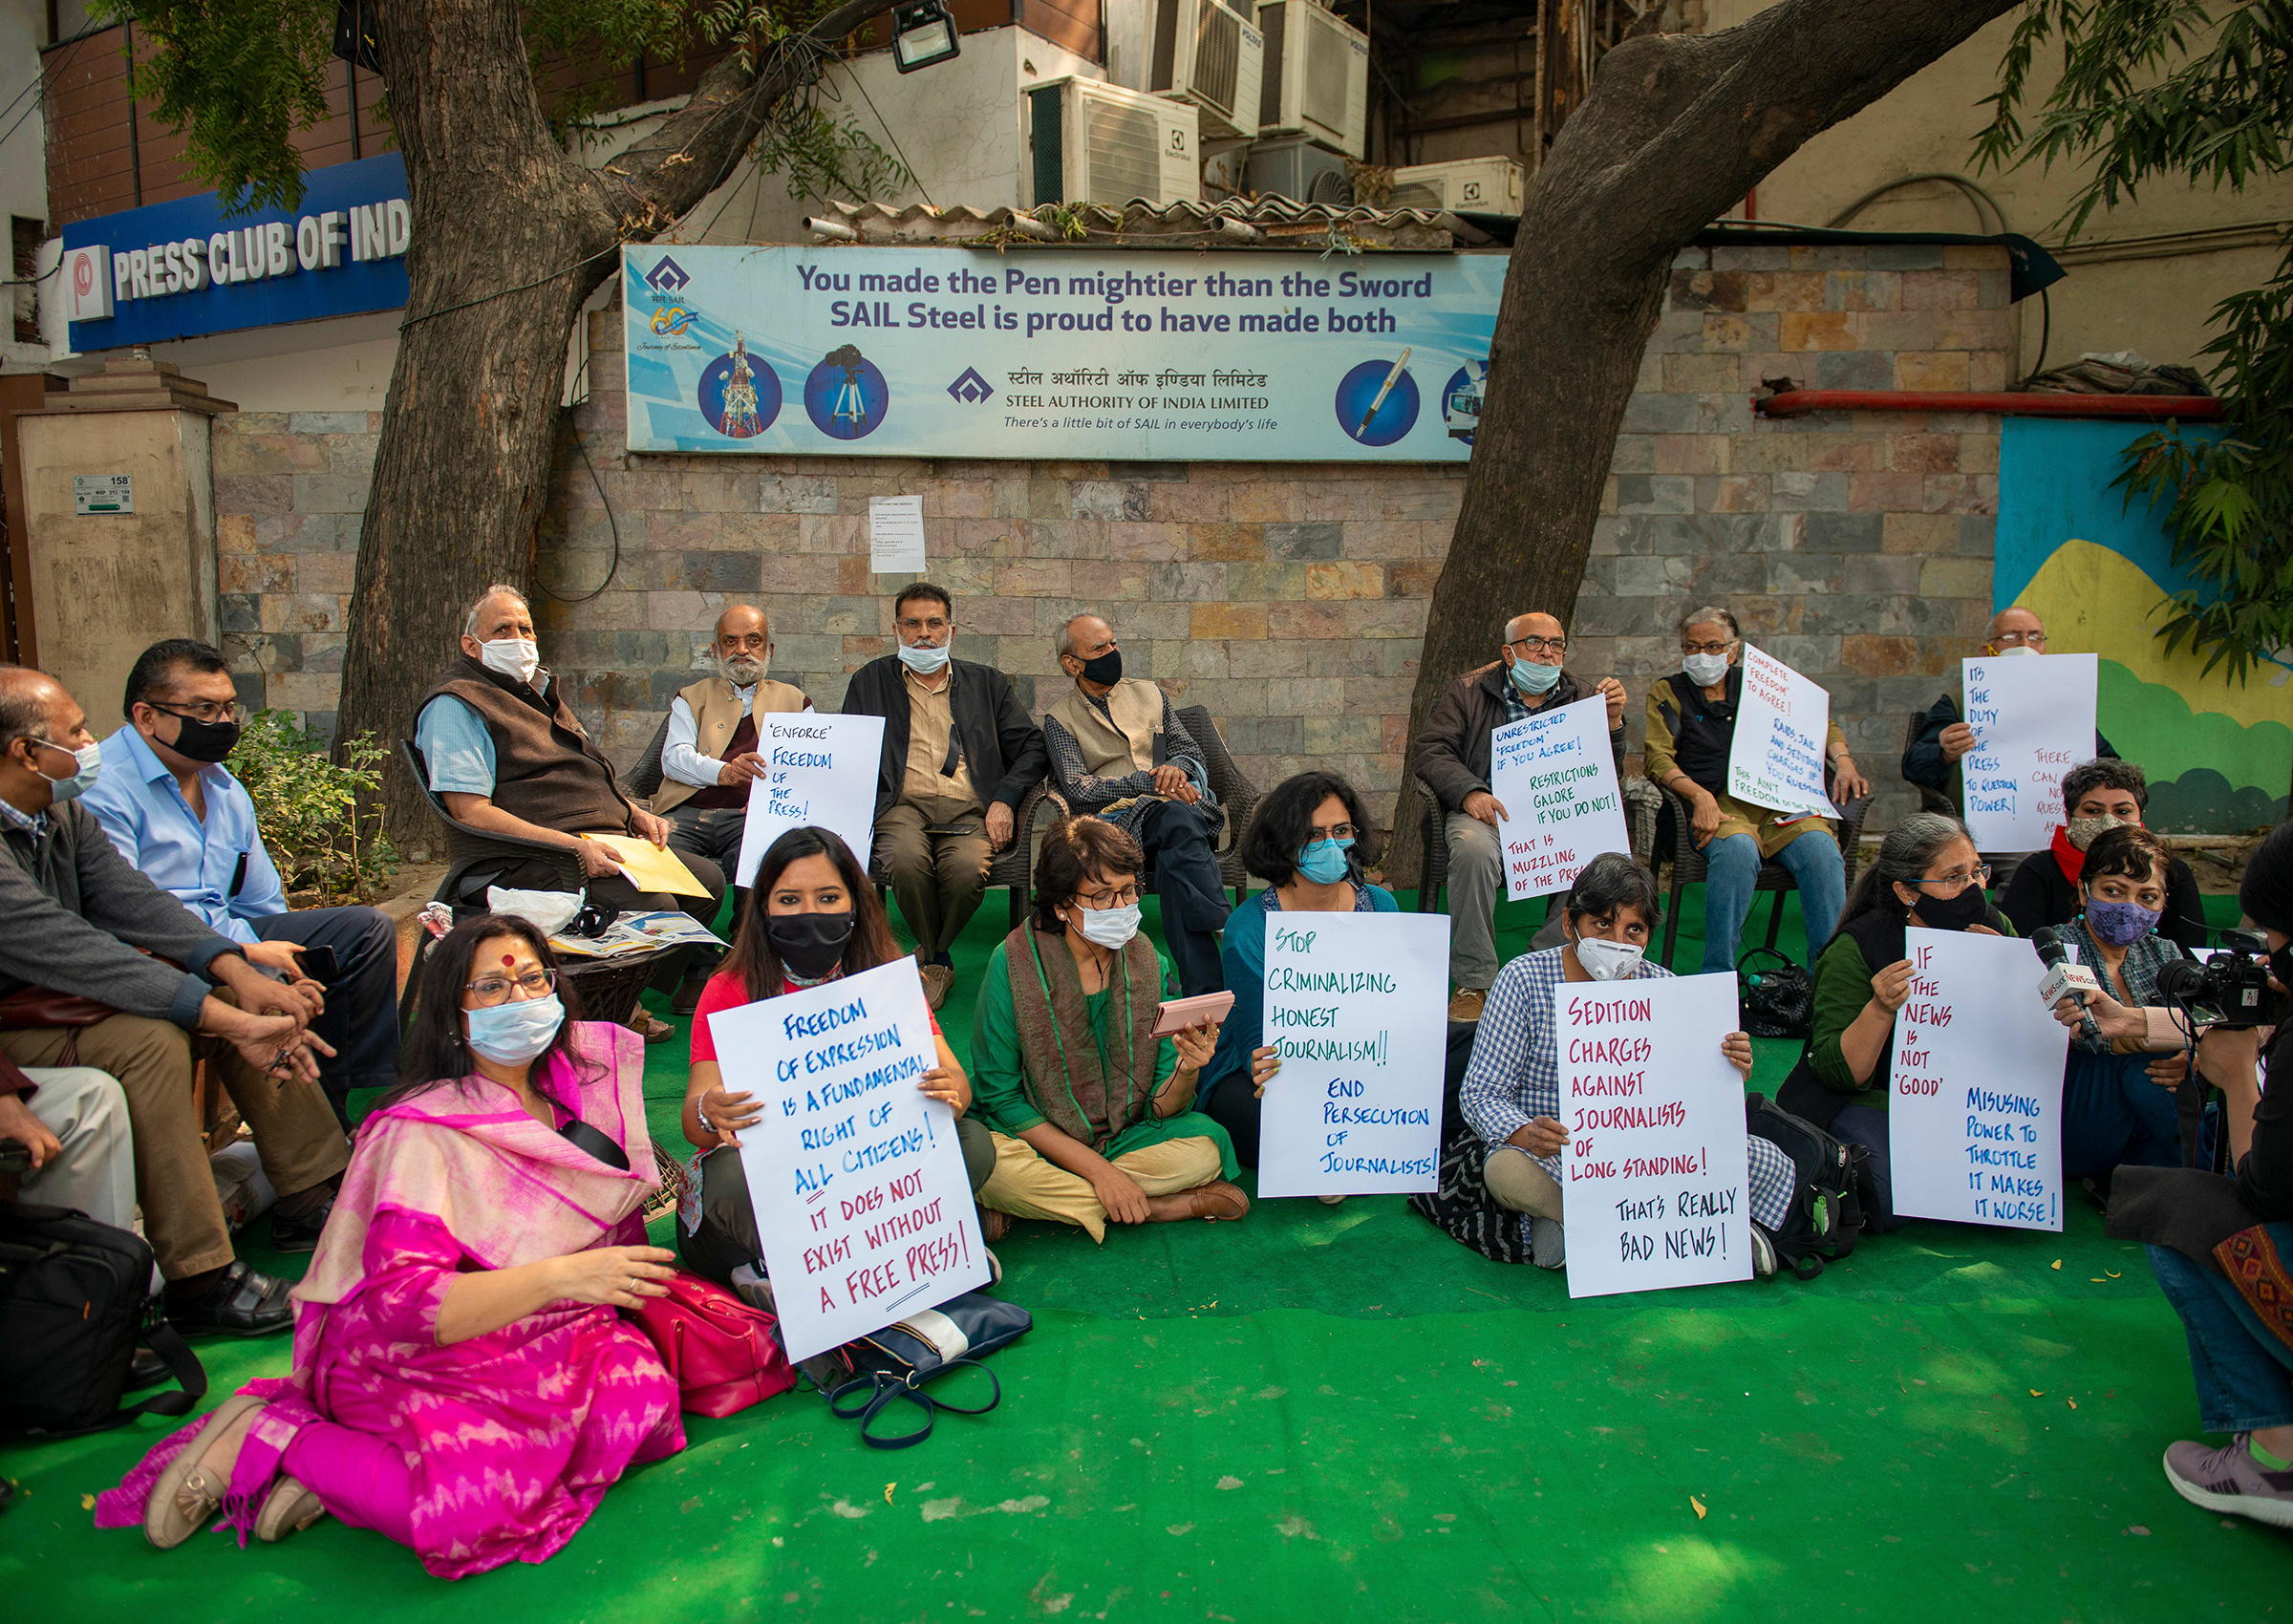 Various journalists' organizations staged a silent sit-in protest against media gagging outside the Press Club of India in New Delhi on Feb 18.